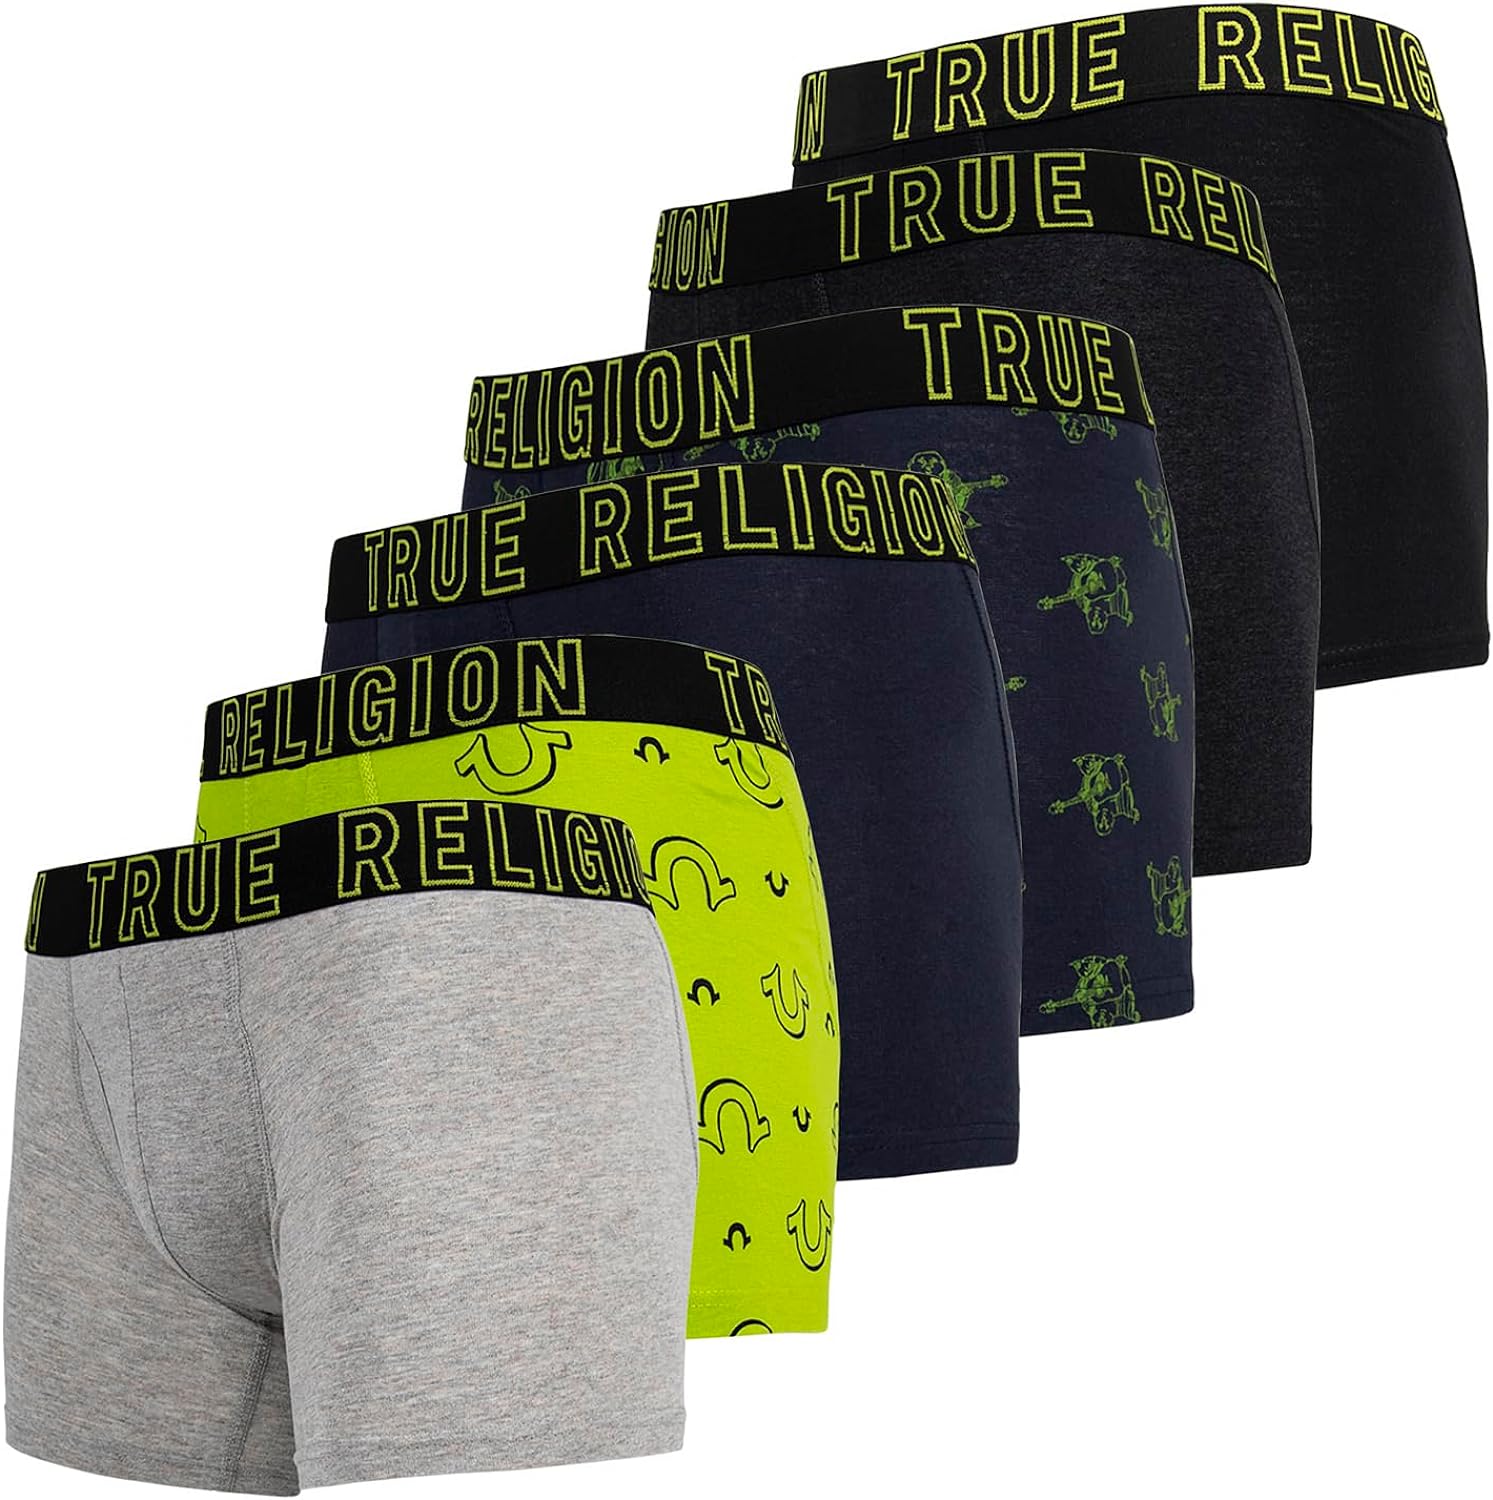 True Religion Mens Boxer Briefs Cotton Stretch Underwear for Men Pack of 6  Black/Gold at  Men's Clothing store